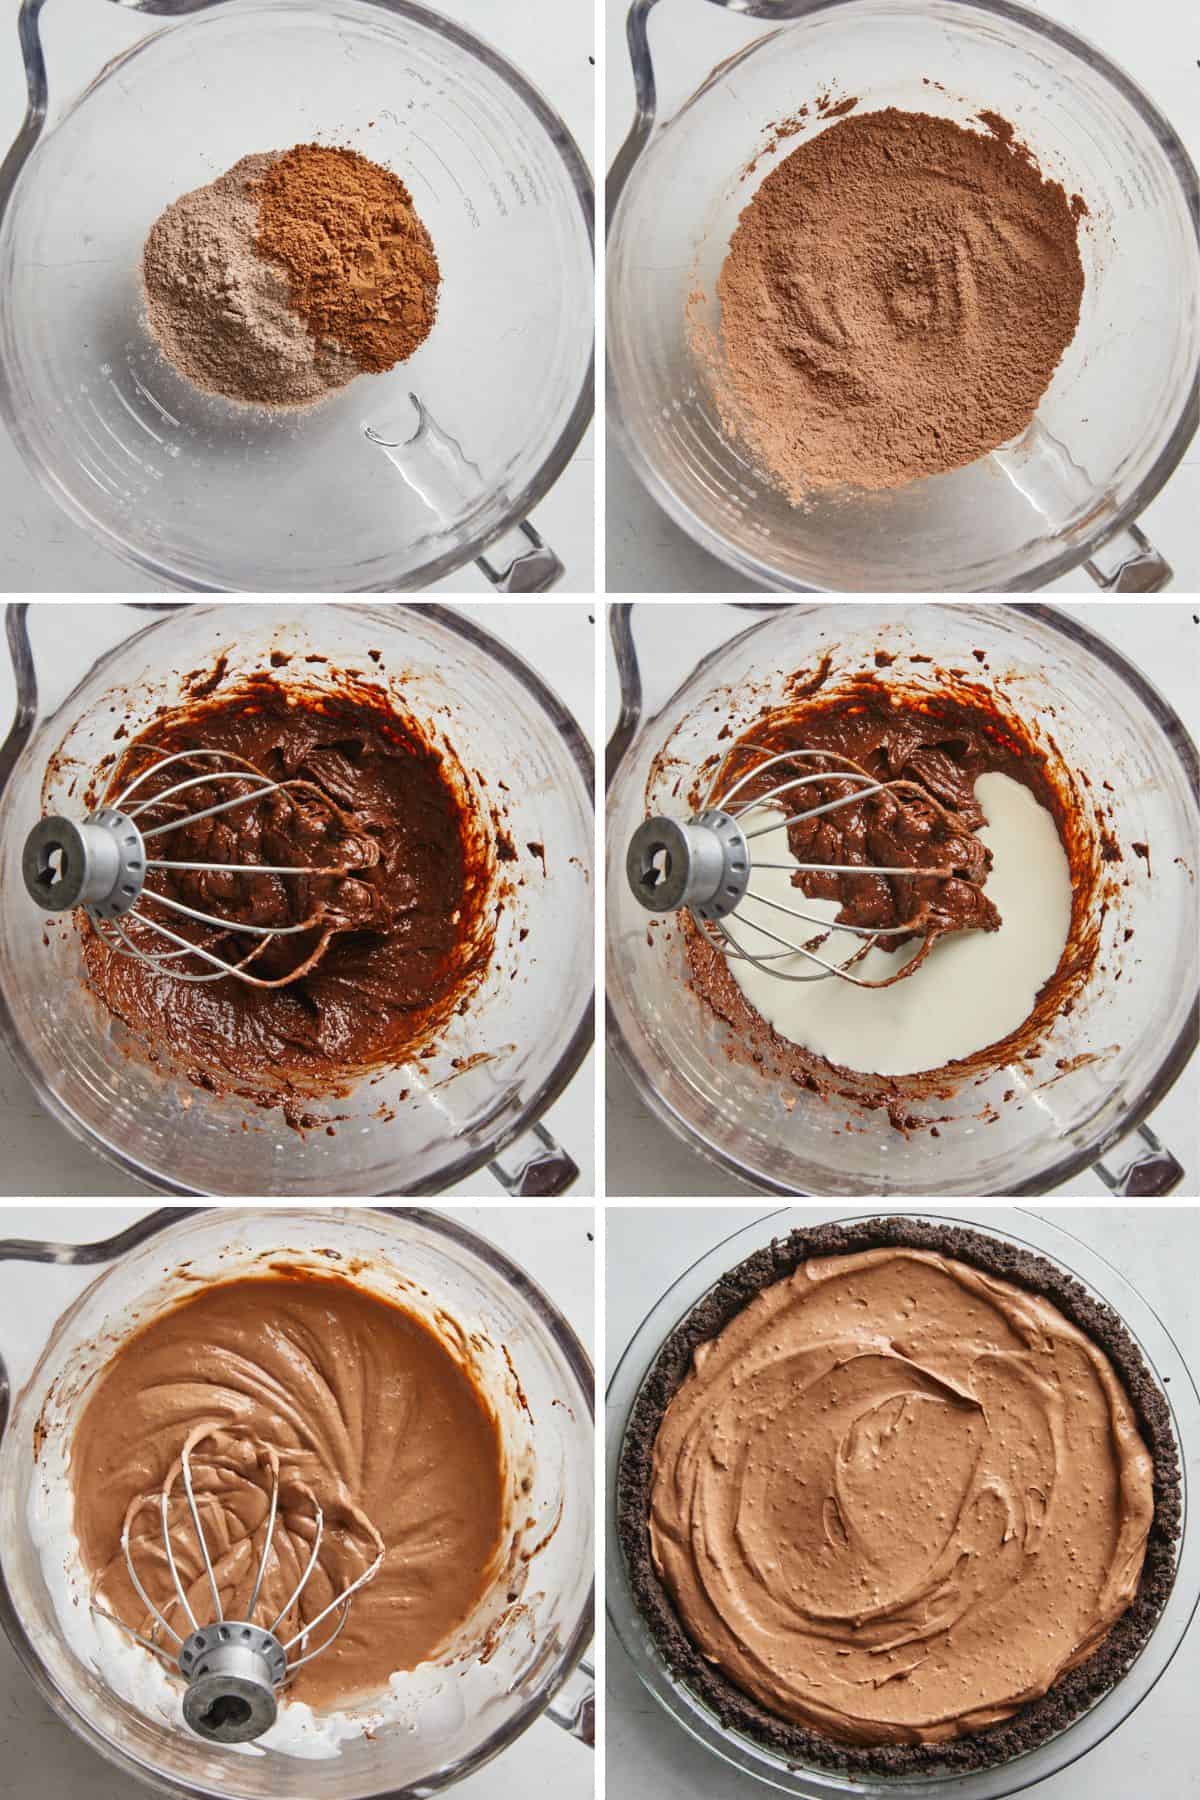 Collage of images showing the steps to make chocolate mousse pie, including mixing the chocolate mousse filling and pouring the filling into the pie crust